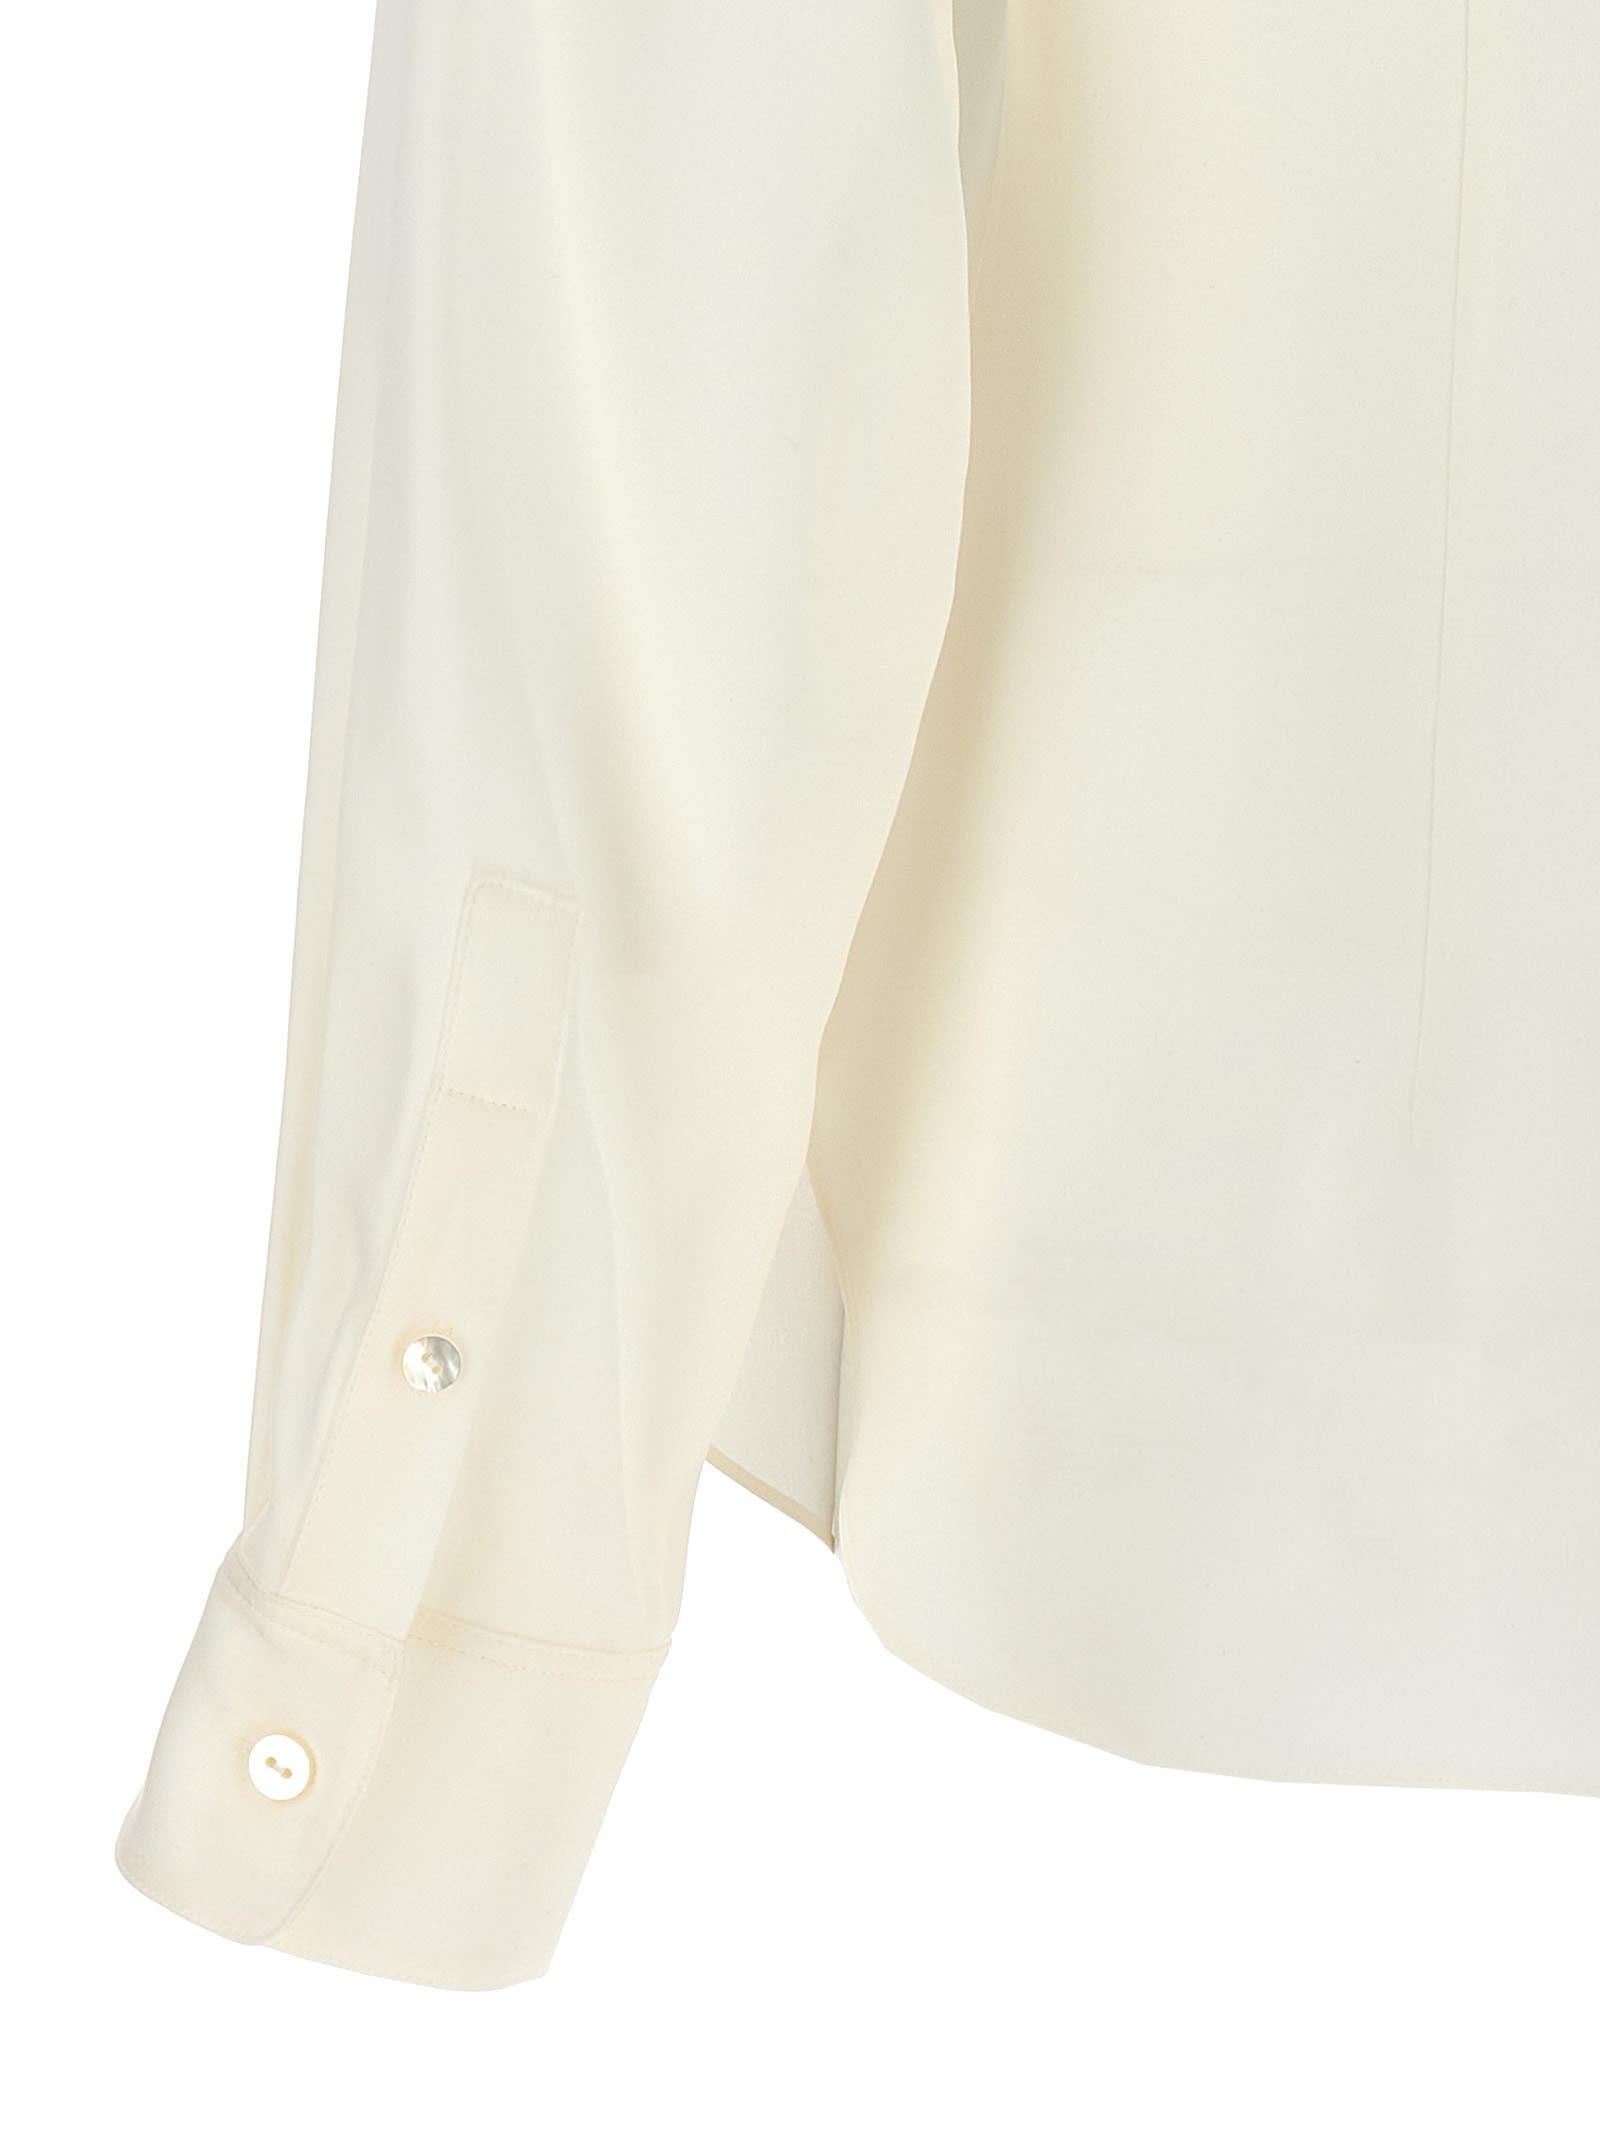 Shop Theory Classic Fitted Shirt In Neutrals